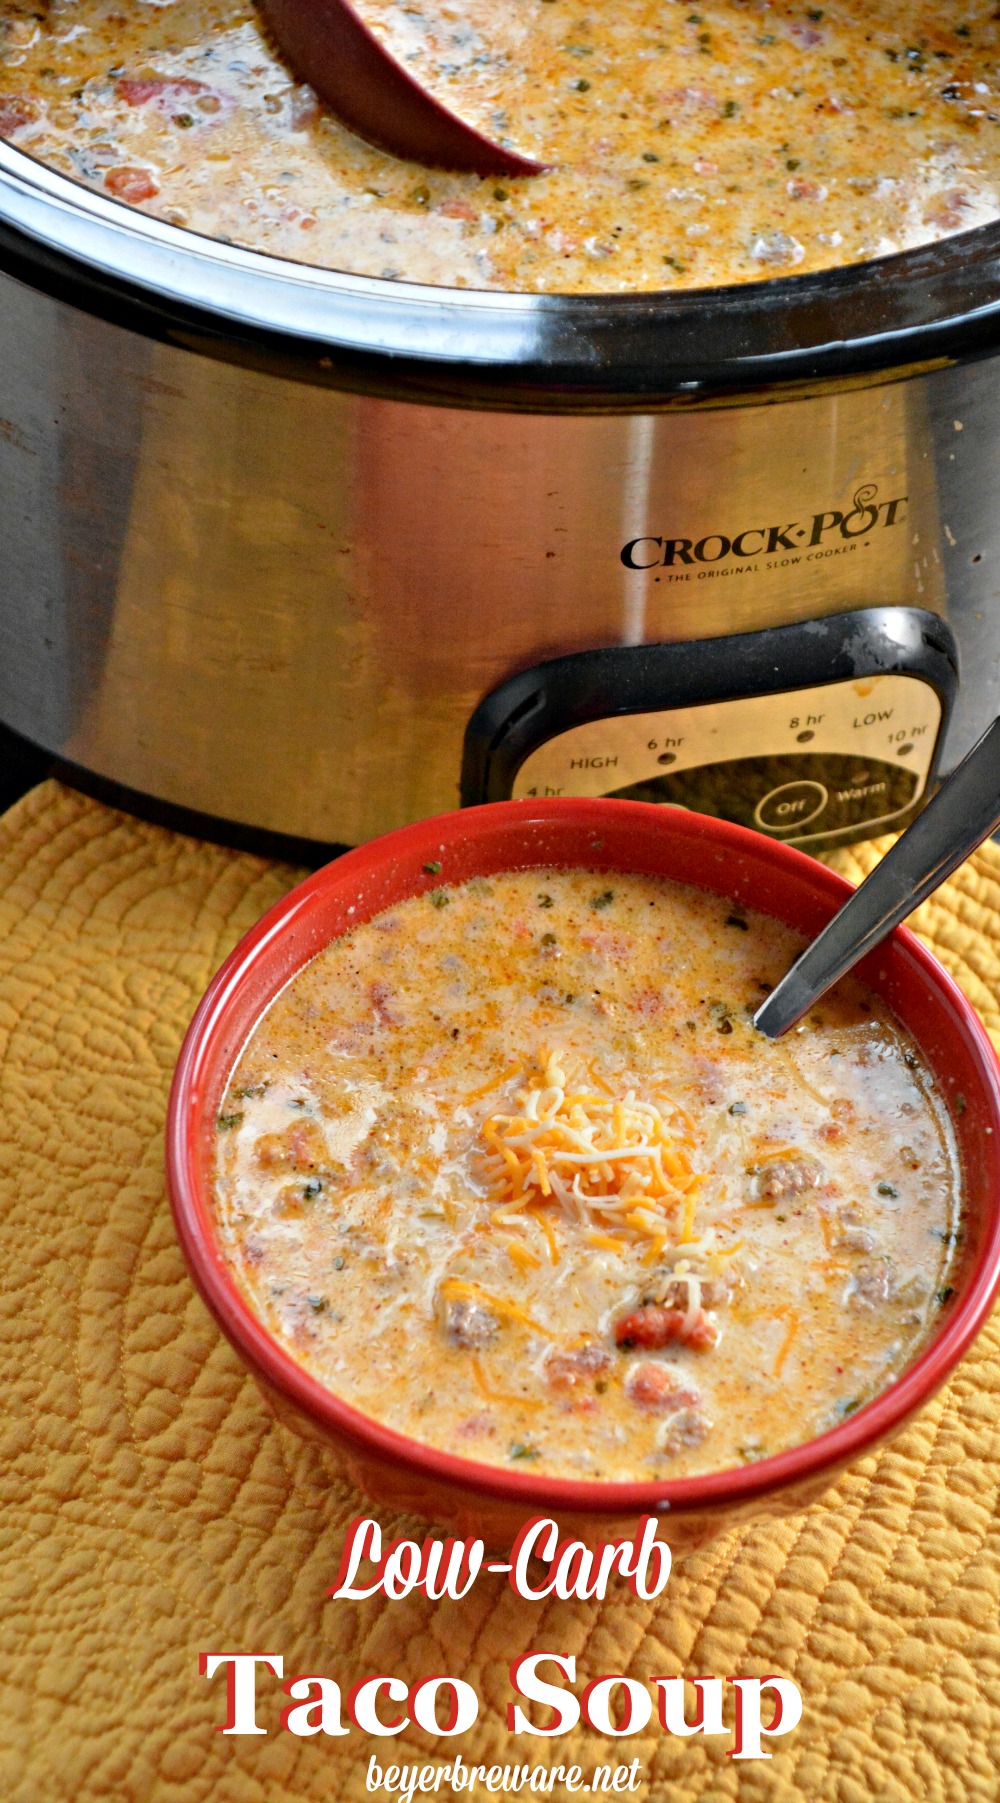 Whether you are eating low-carb, gluten-free, or a keto diet, this crock pot low-carb taco soup is sure to leave all loving it regardless of if you are on a diet or not.